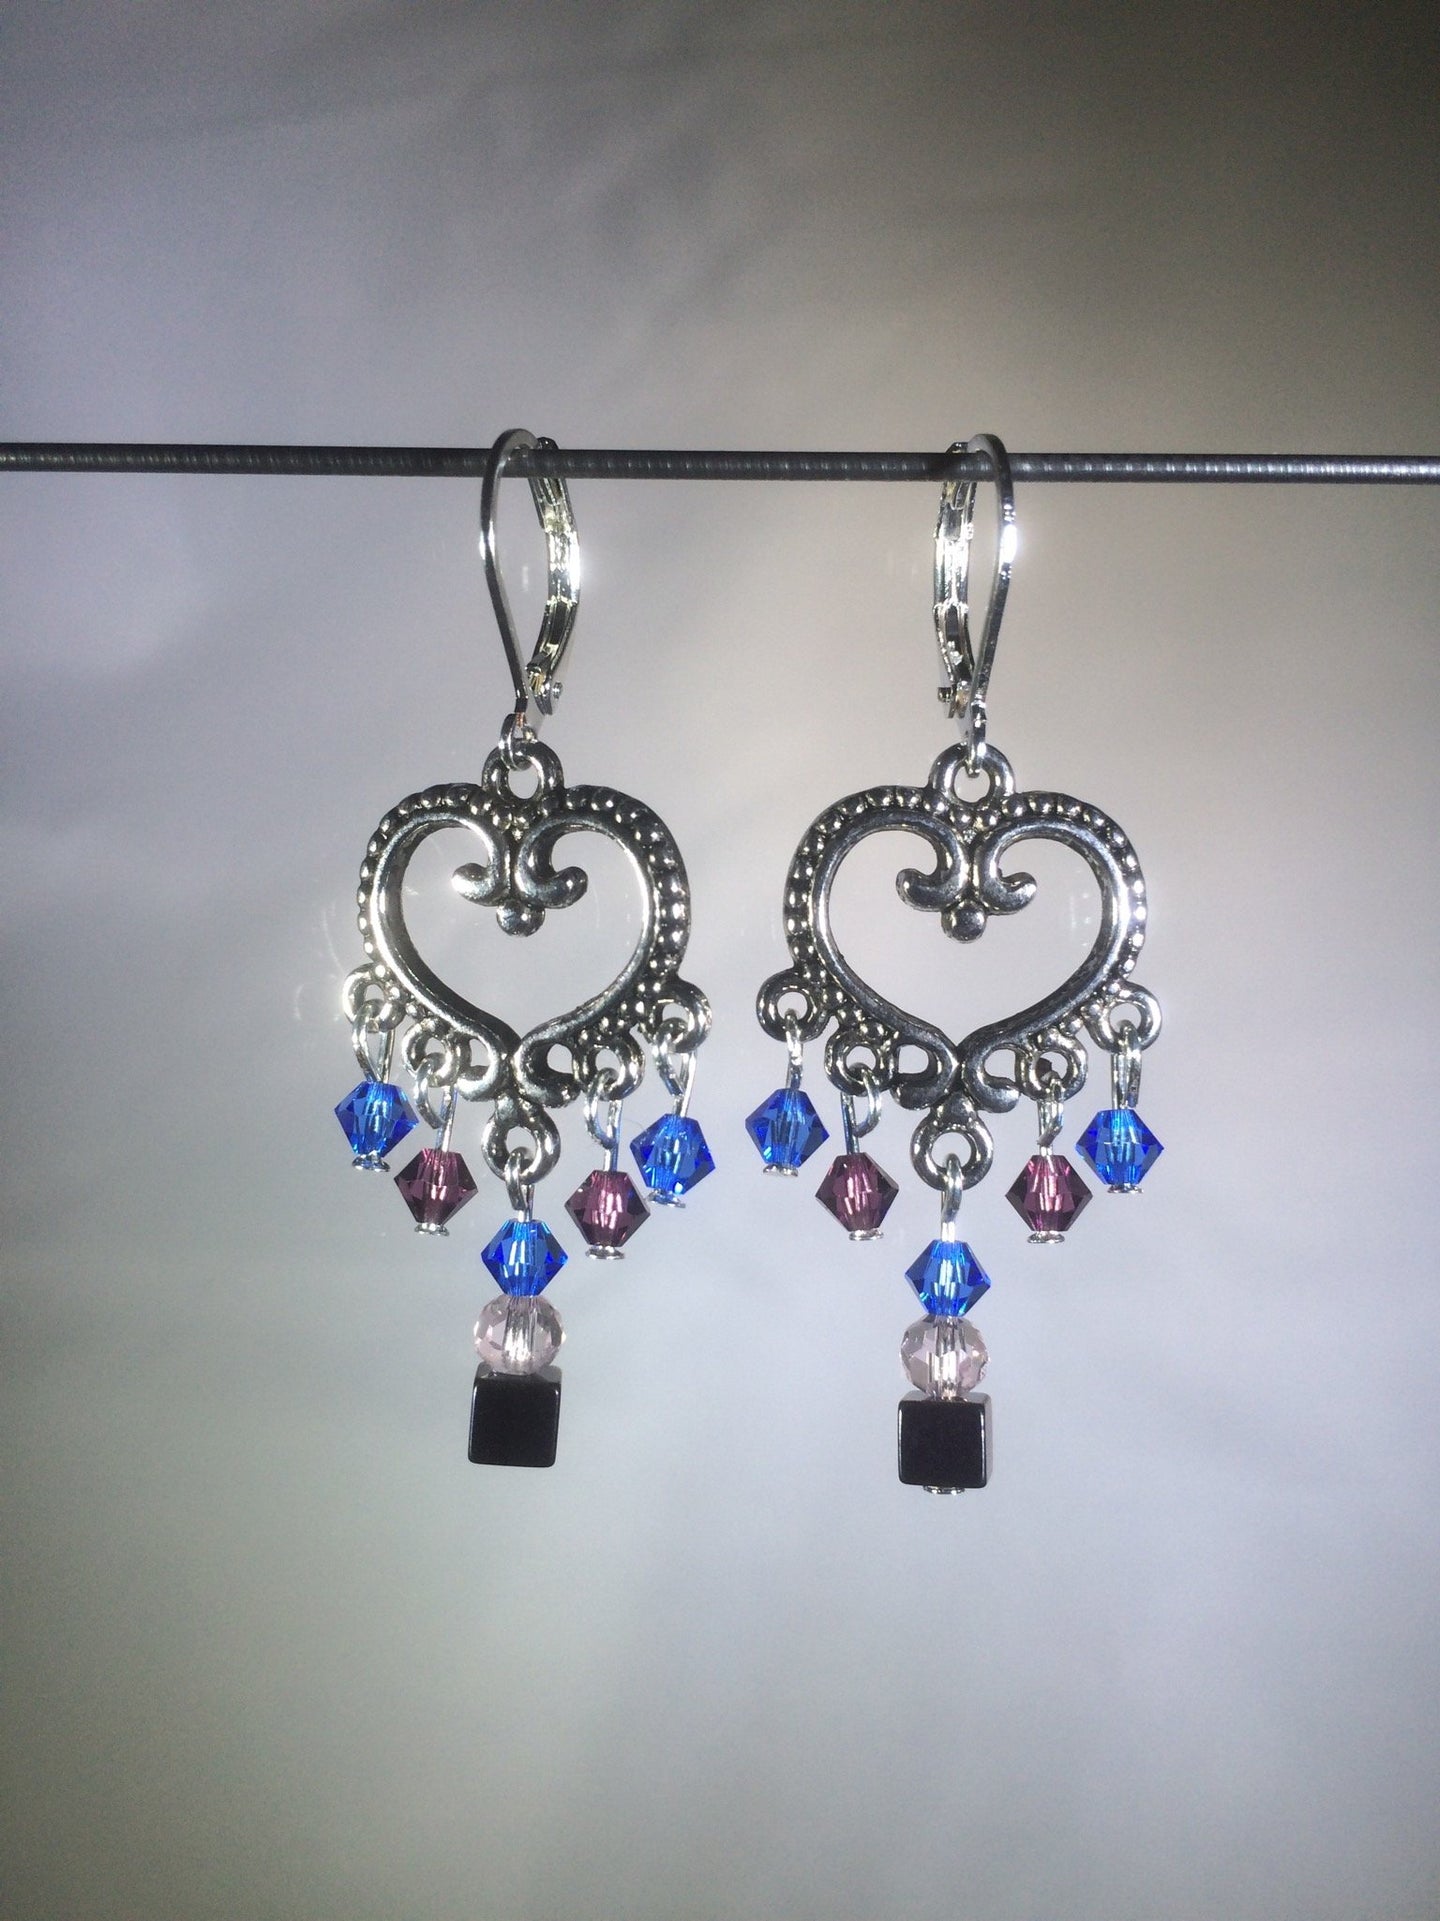 Blue glass and Czech crystal beads dangle from a central brass heart focal in these 1.25